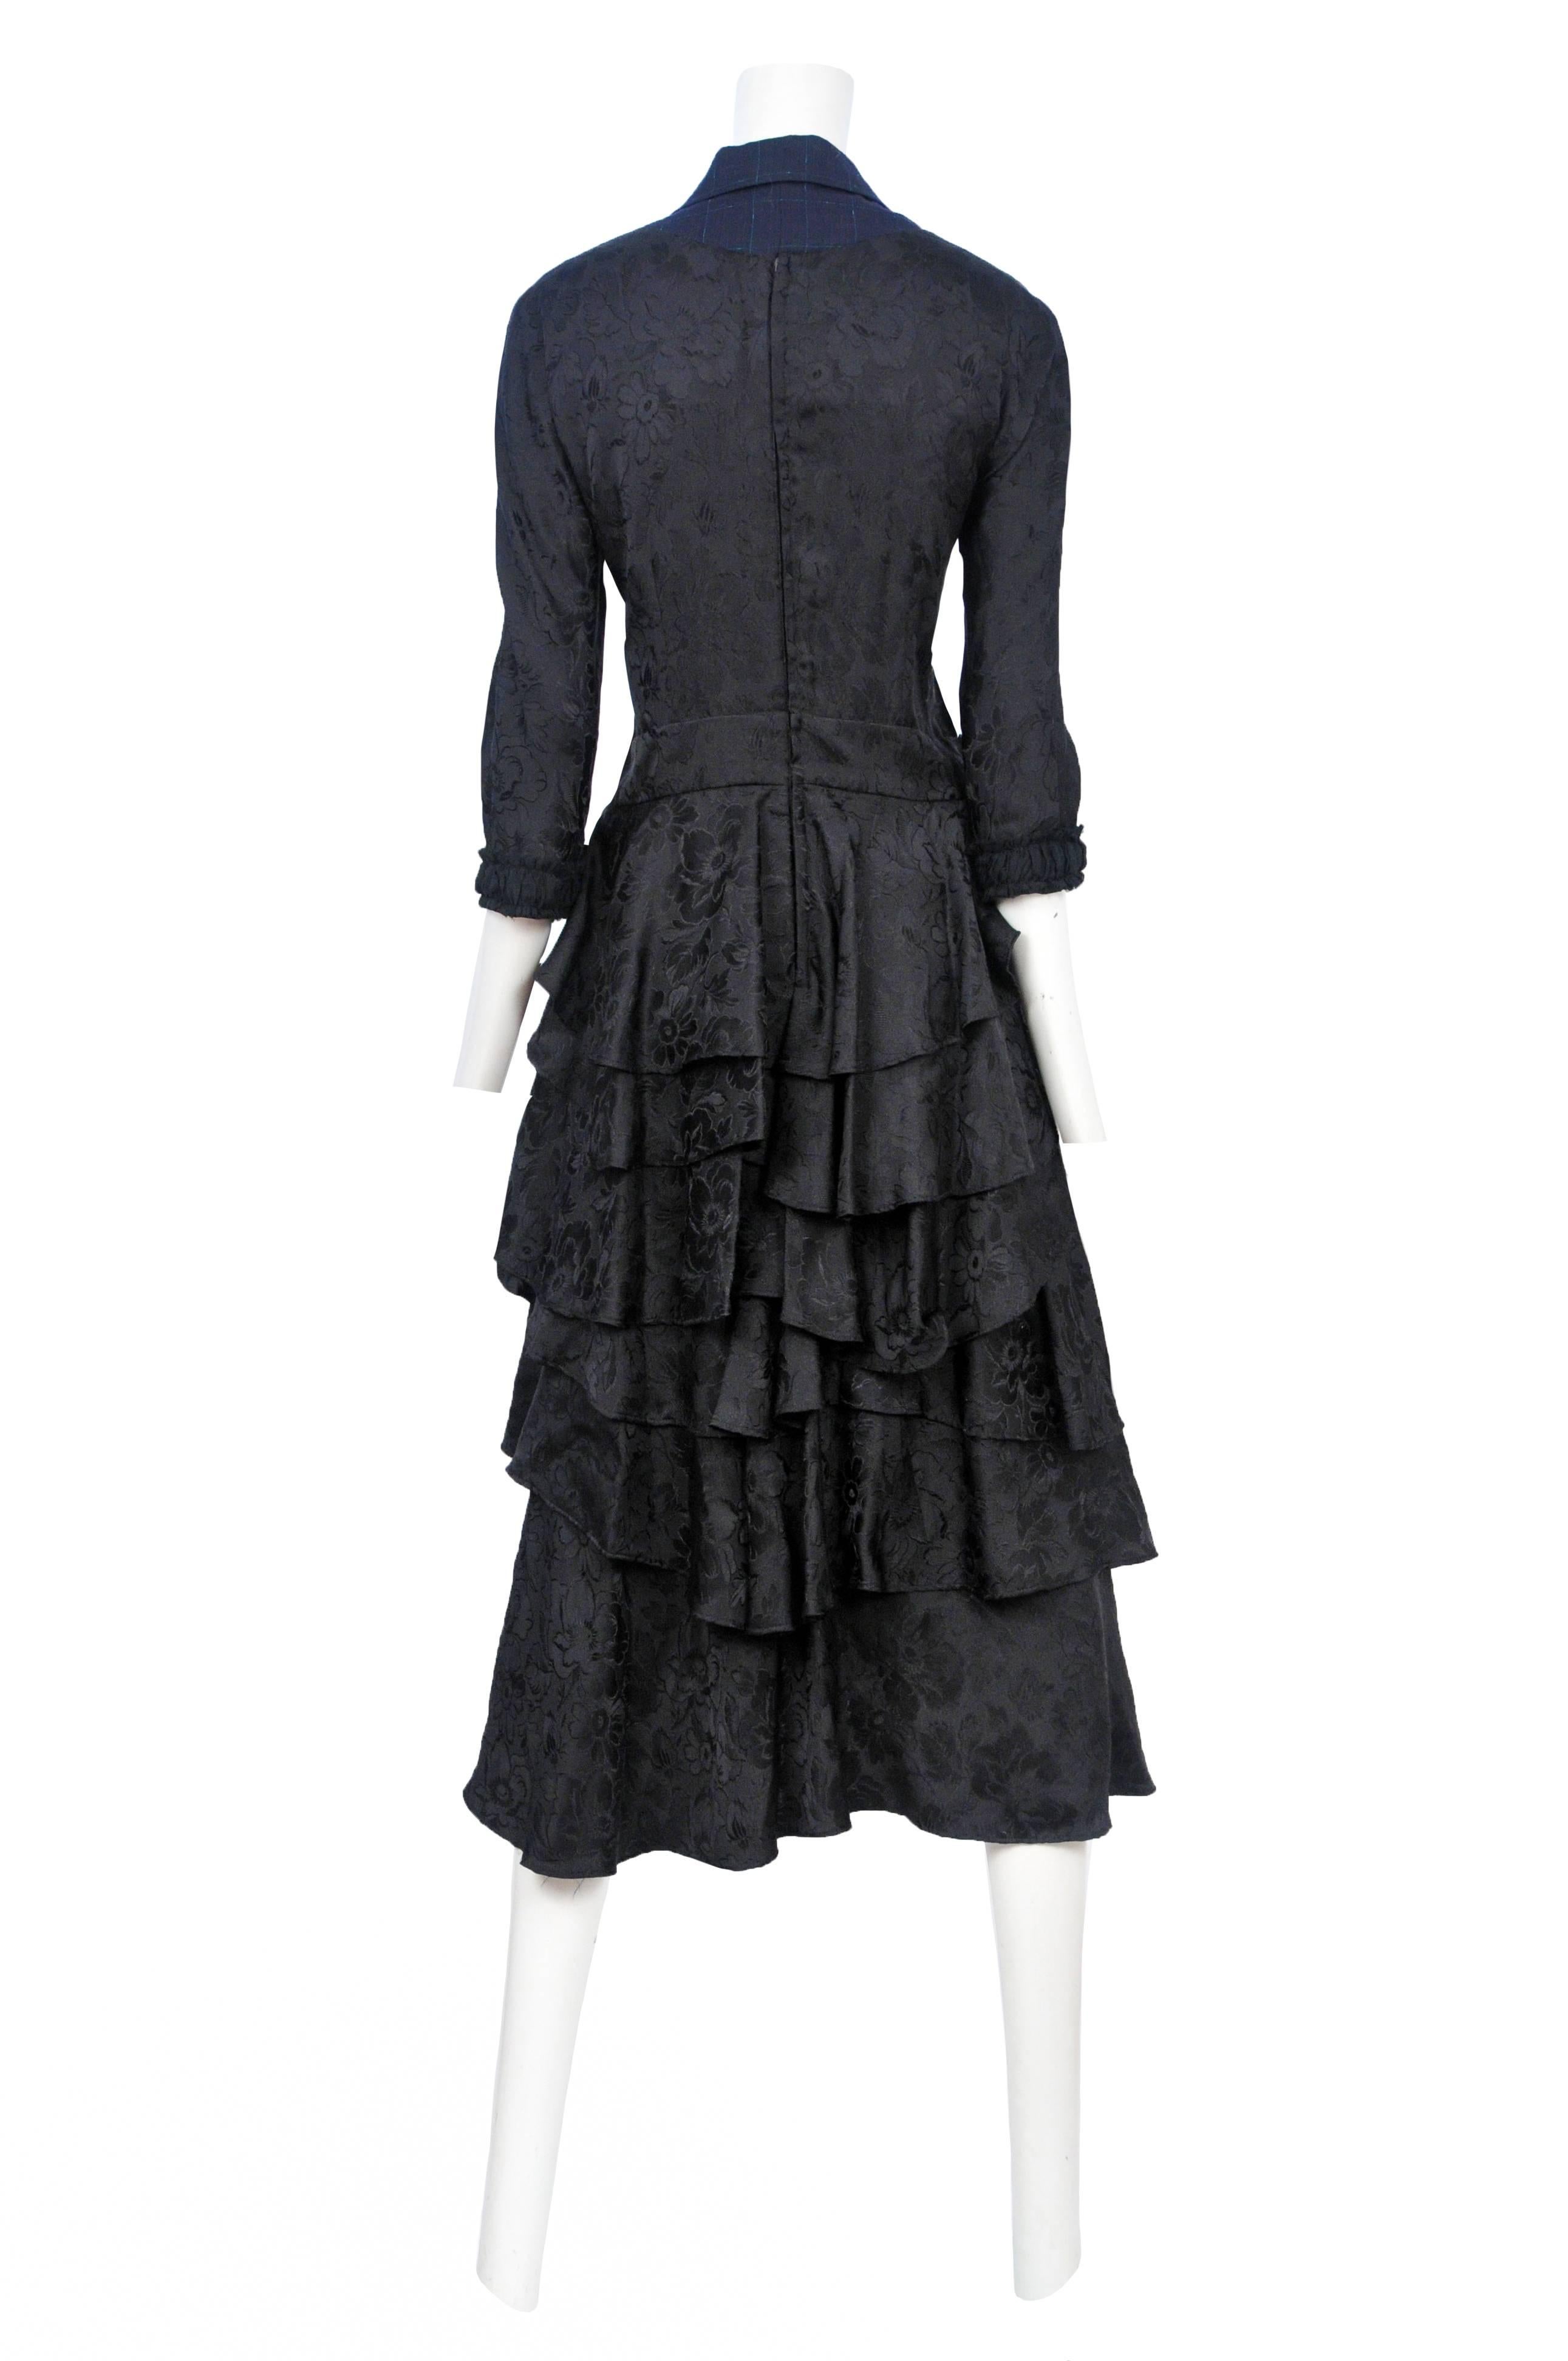 Vintage Comme des Garcons black floral damask wedding dress featuring navy pinstripe wool at the collar, tiers of gathered black ribbon at the skirt and layers of ruffles at the back skirt. Circa 2006